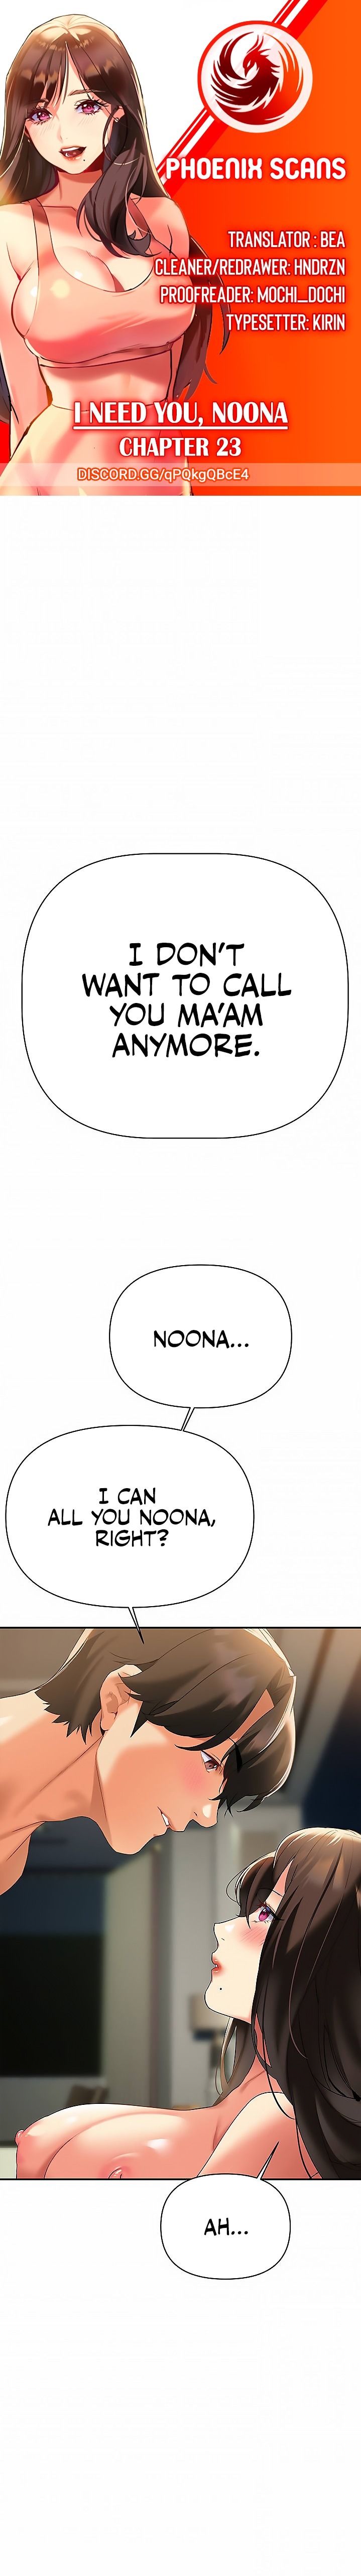 I Need You, Noona - Chapter 23 Page 1